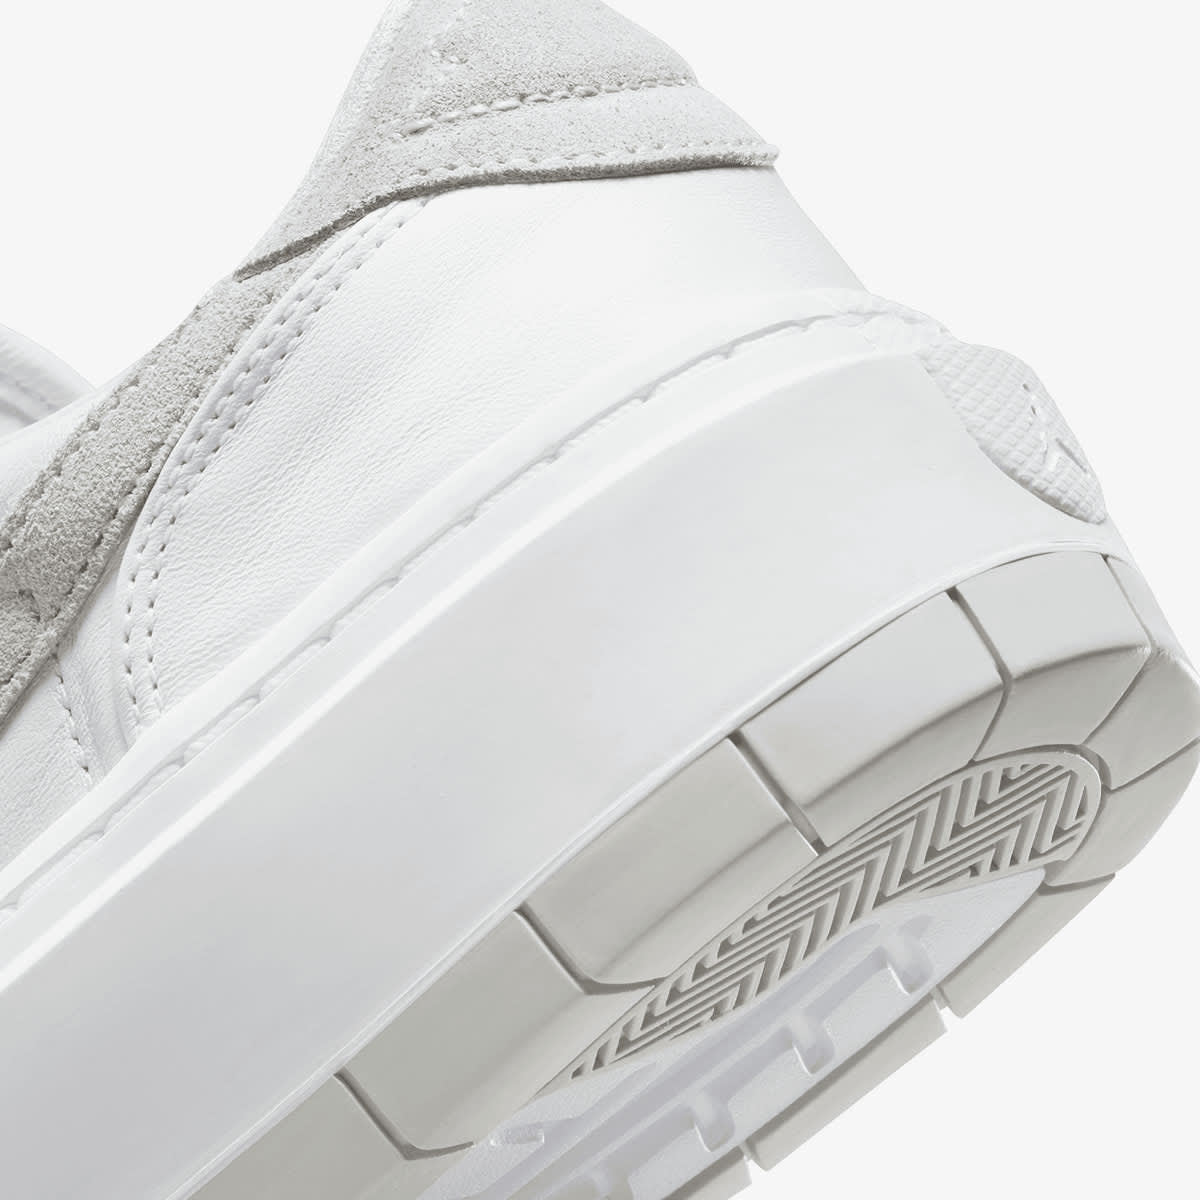 Air Jordan 1 Elevate Low W (White & Neutral Grey) | END. Launches